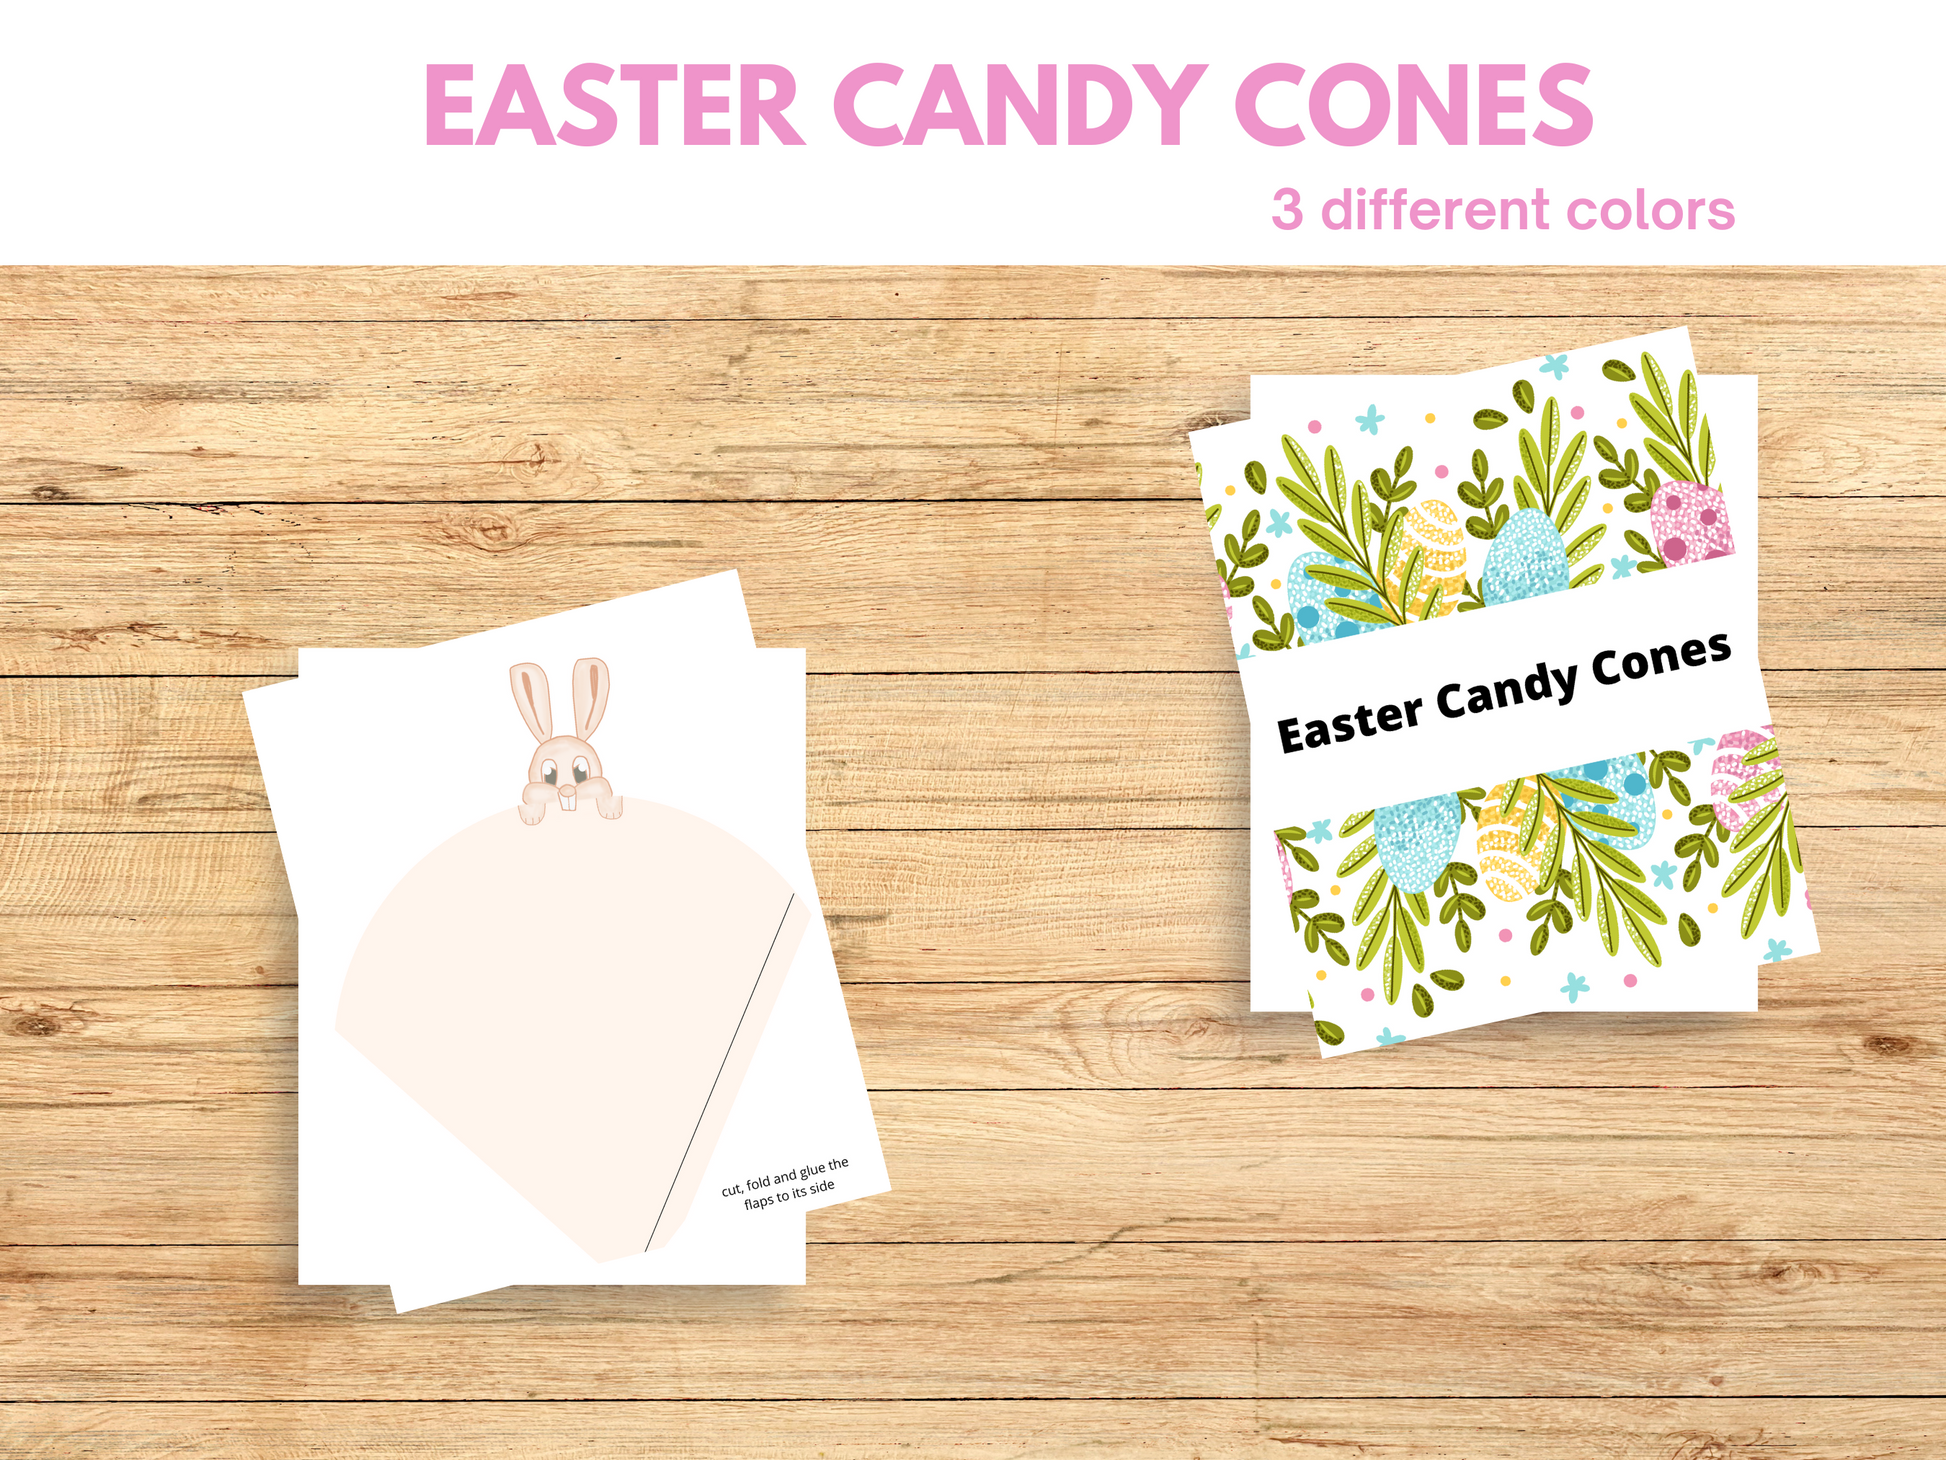 Printable Easter candy cones showing one light pink candy cone with a bunny rabbit.